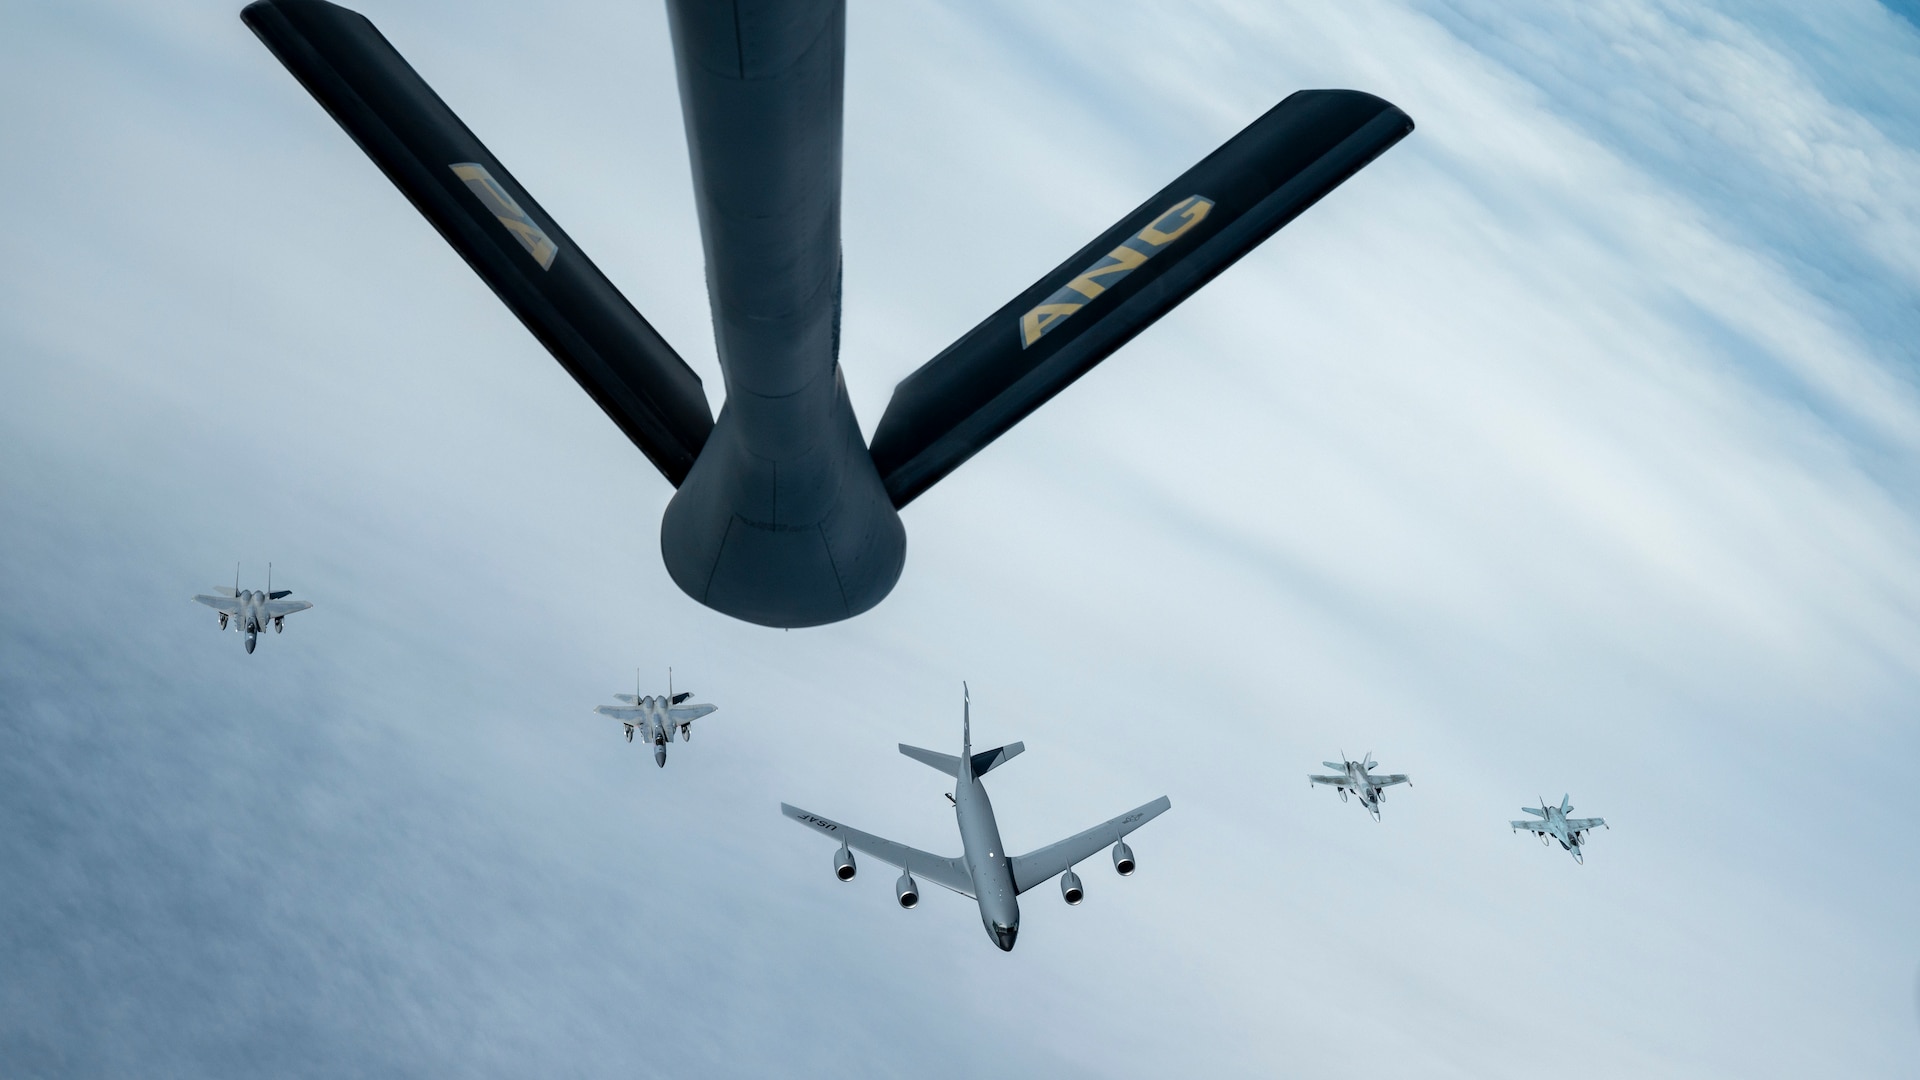 Under the direction of the North American Aerospace Defense Command , F-15s assigned to the Massachusetts Air National Guard, CF-18s assigned to the Royal Canadian Air Force, and a KC-135 assigned to the Maine Air National Guard fly in formation behind a KC-135 assigned to the Pennsylvania Air National Guard during air defense Operation Noble Defender Oct. 27, 2022.  The exercise validates the command’s capability to defend Canada and the United States.